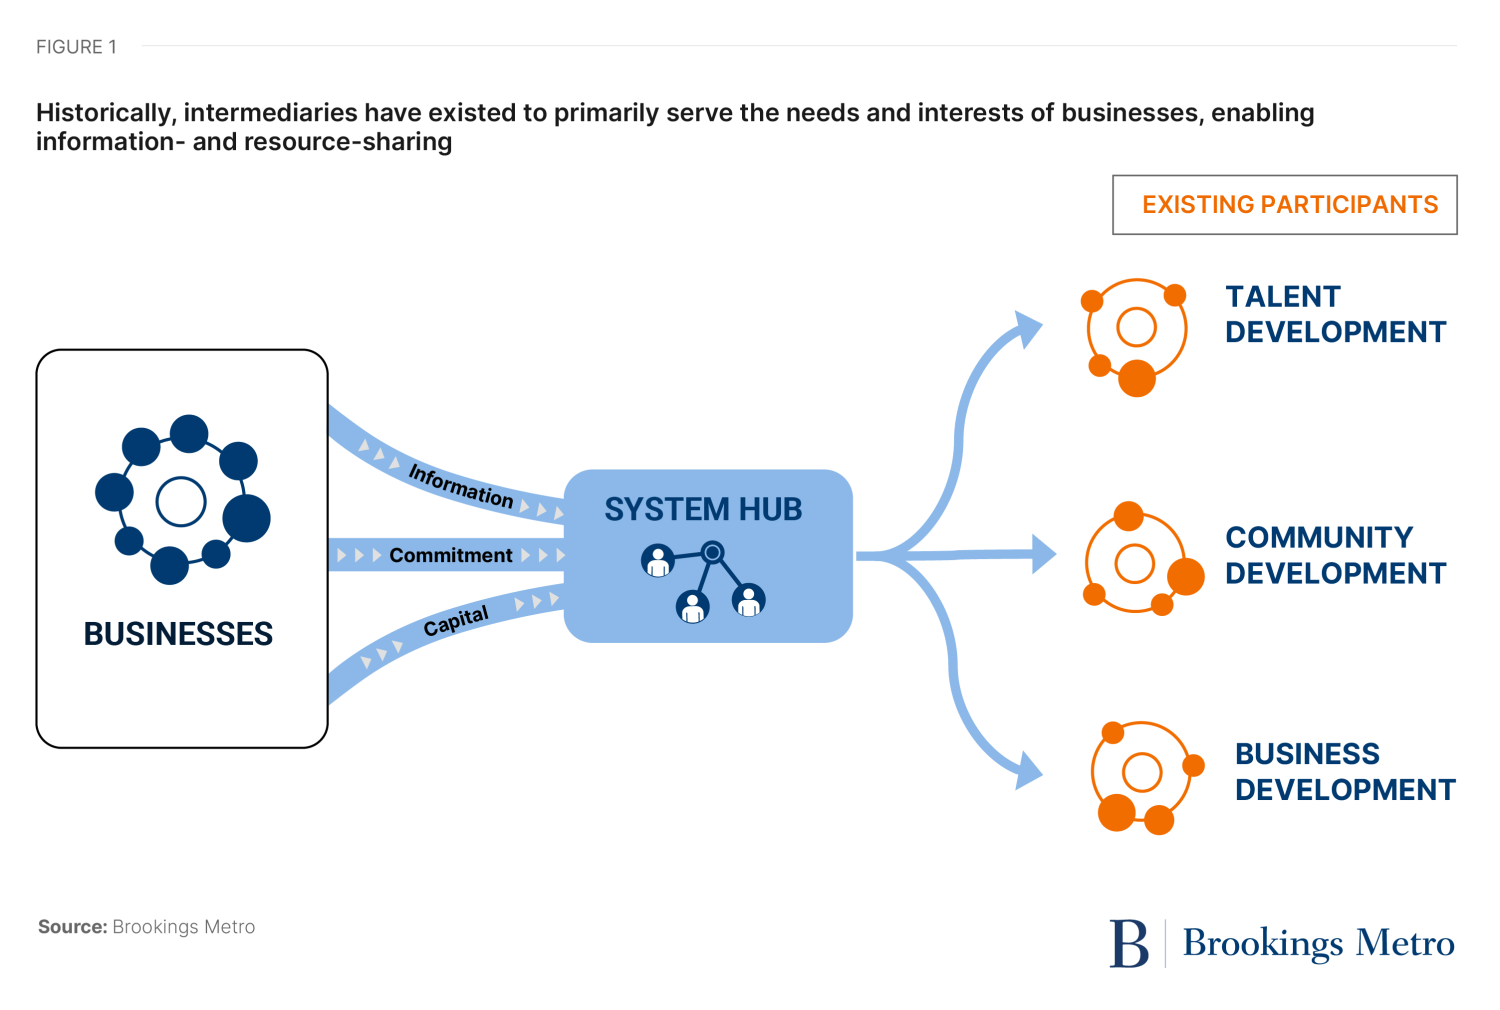 Figure 1: Historically, intermediaries have existed to primarily serve the needs and interests of businesses, enabling information- and resource-sharing 